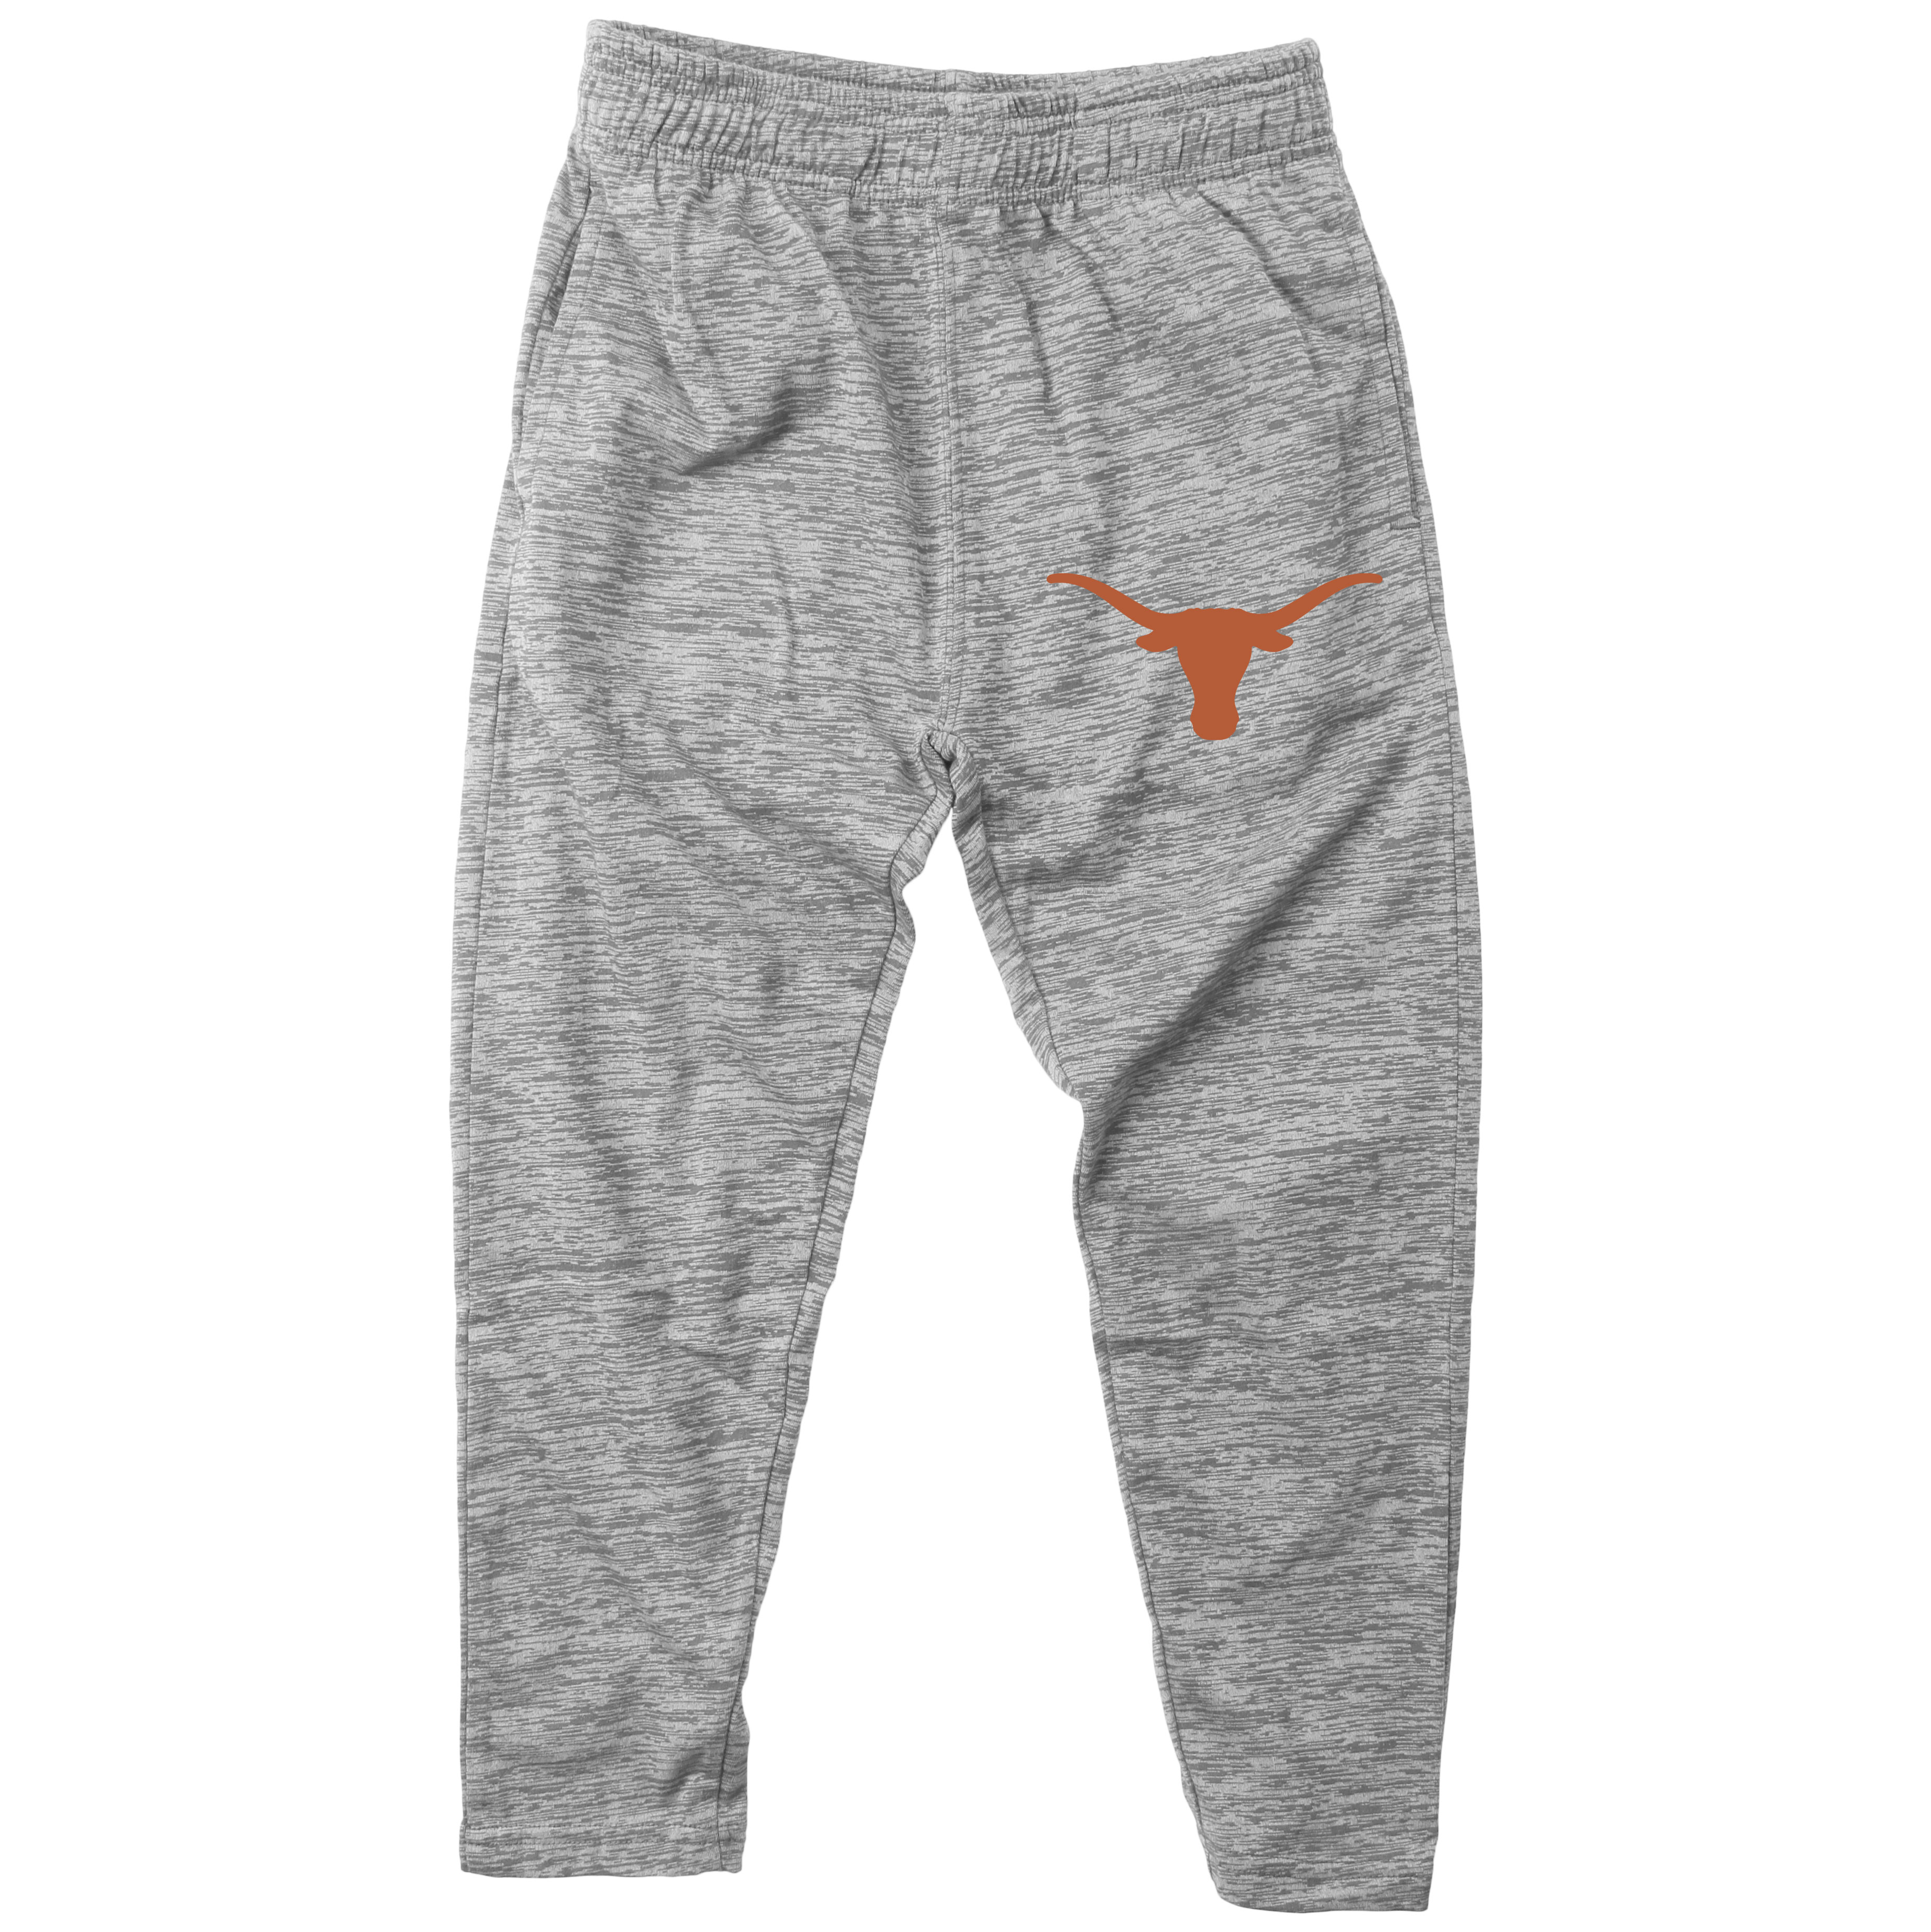 Wes And Willy Texas Longhorns Youth Boys Cloudy Yarn Athletic Pant